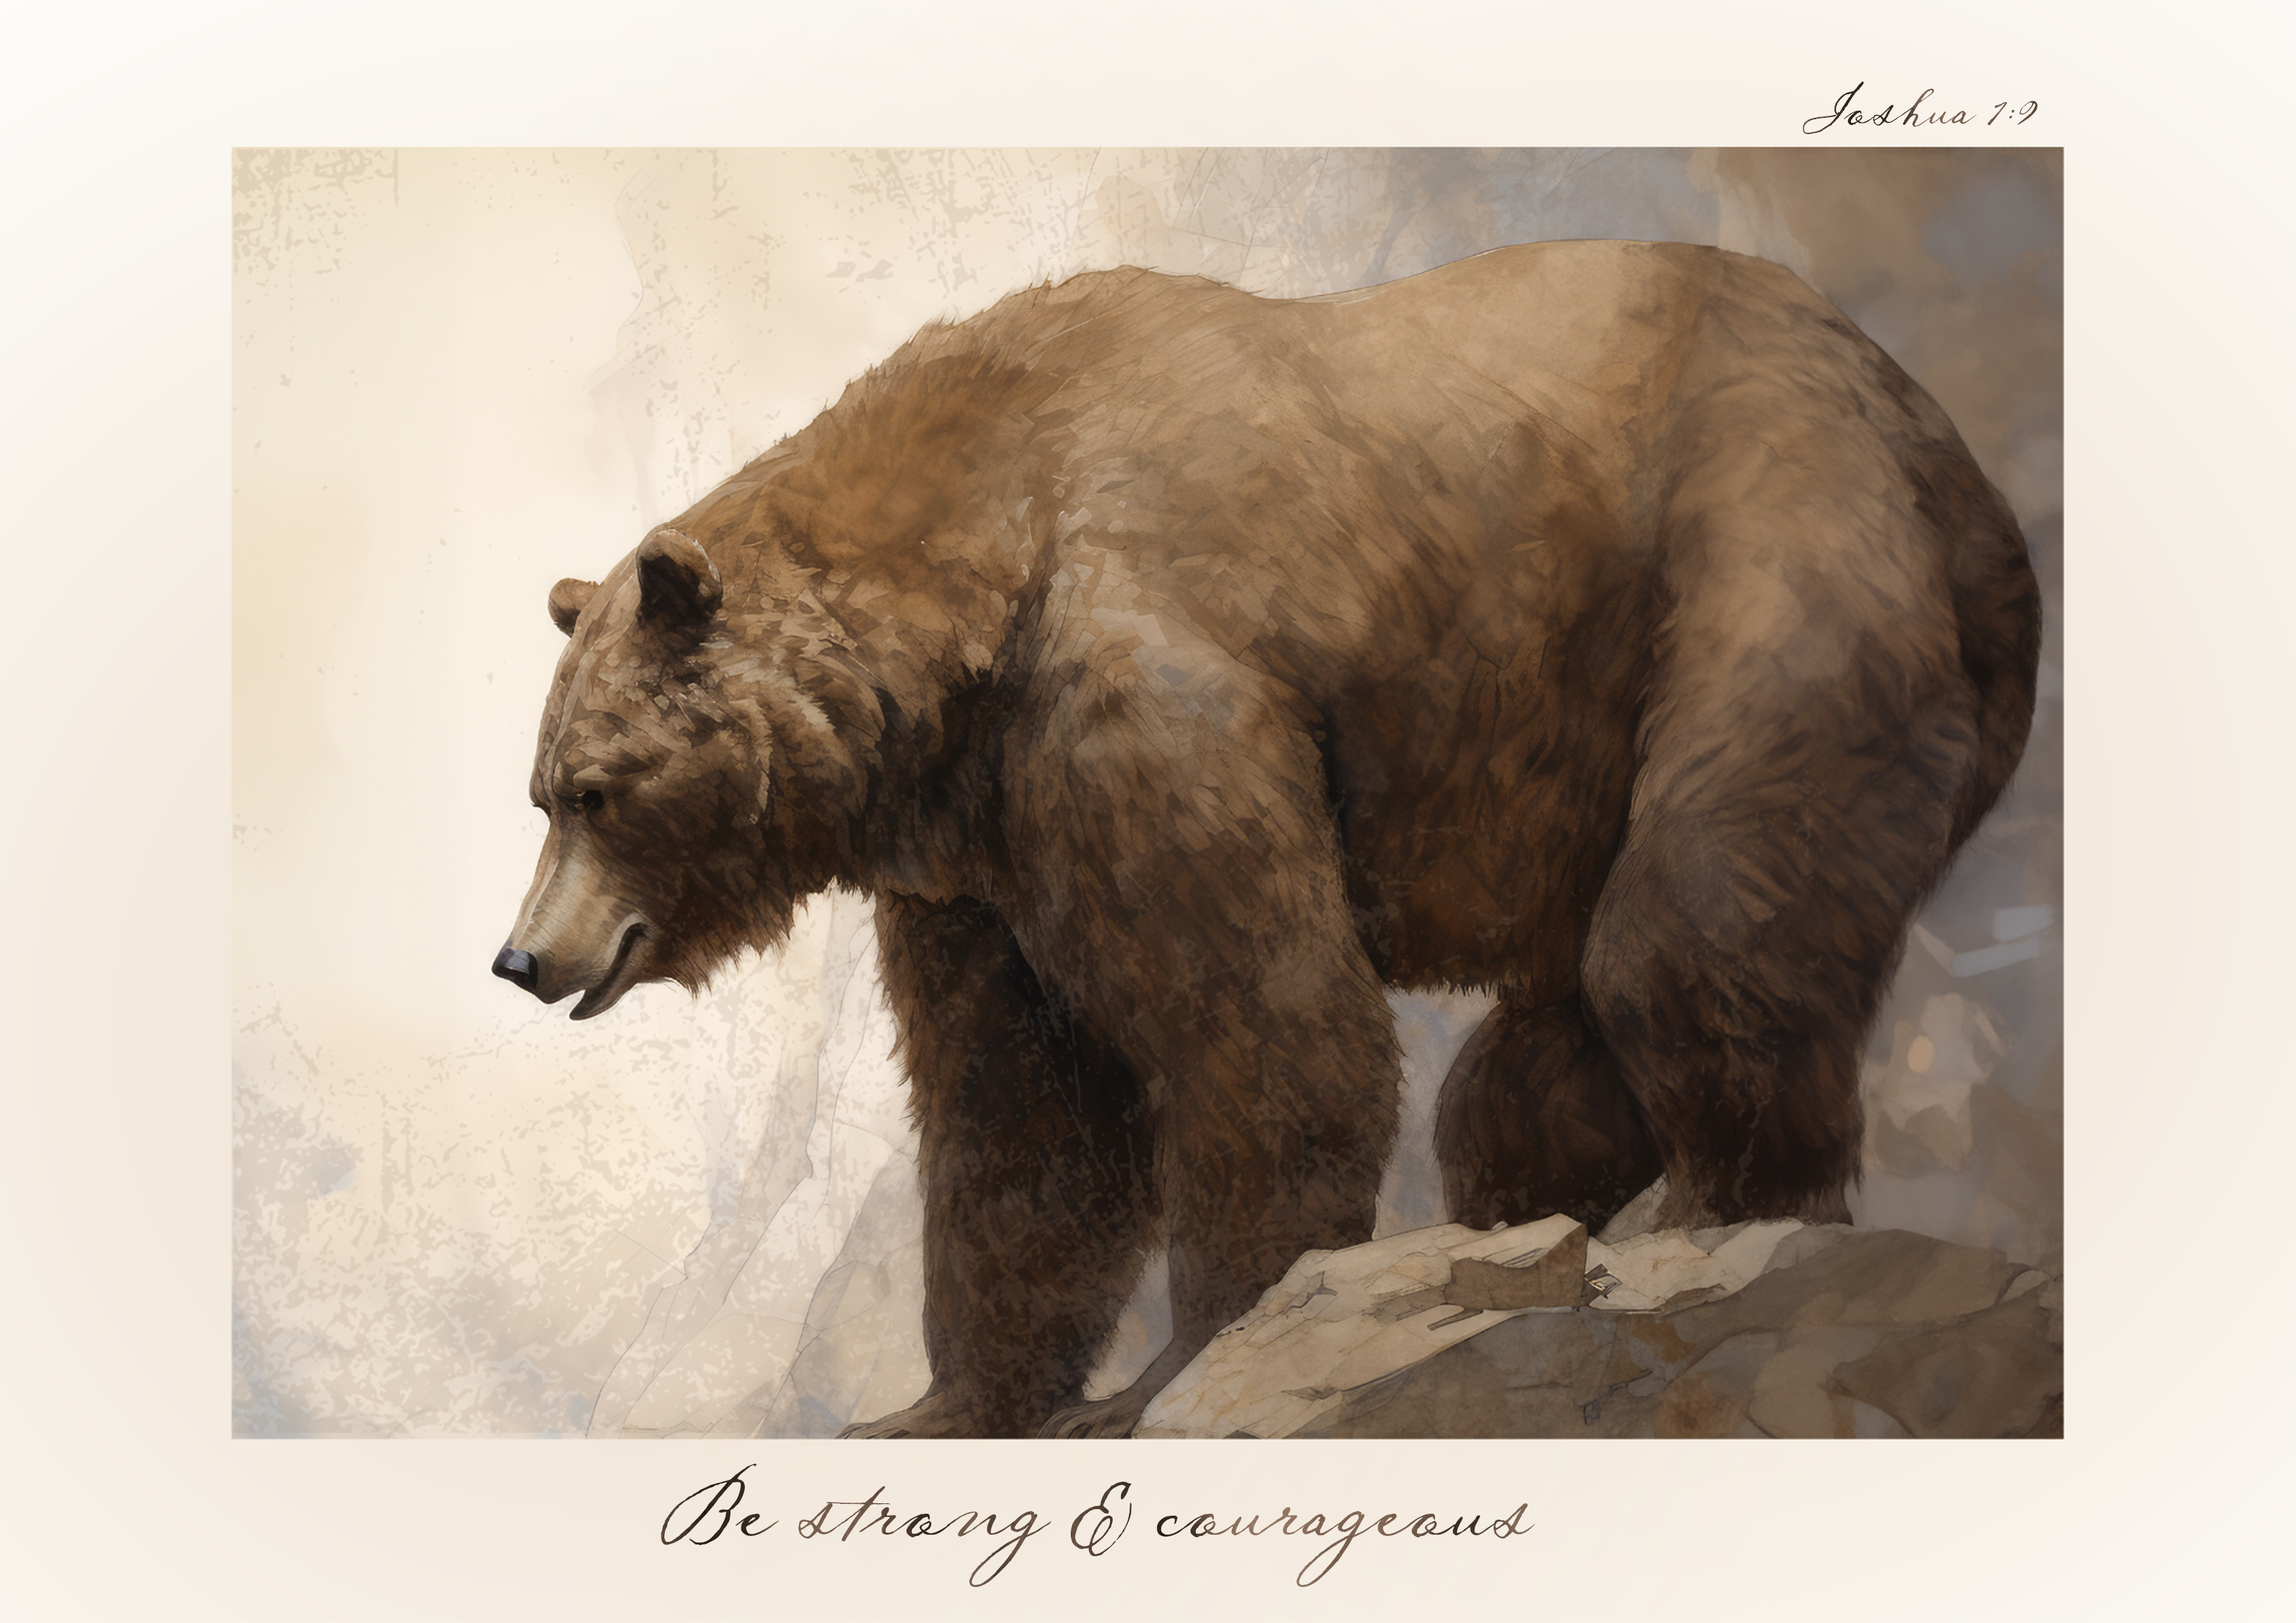 Joshua 1:9 Art Print- Be strong and Courageous